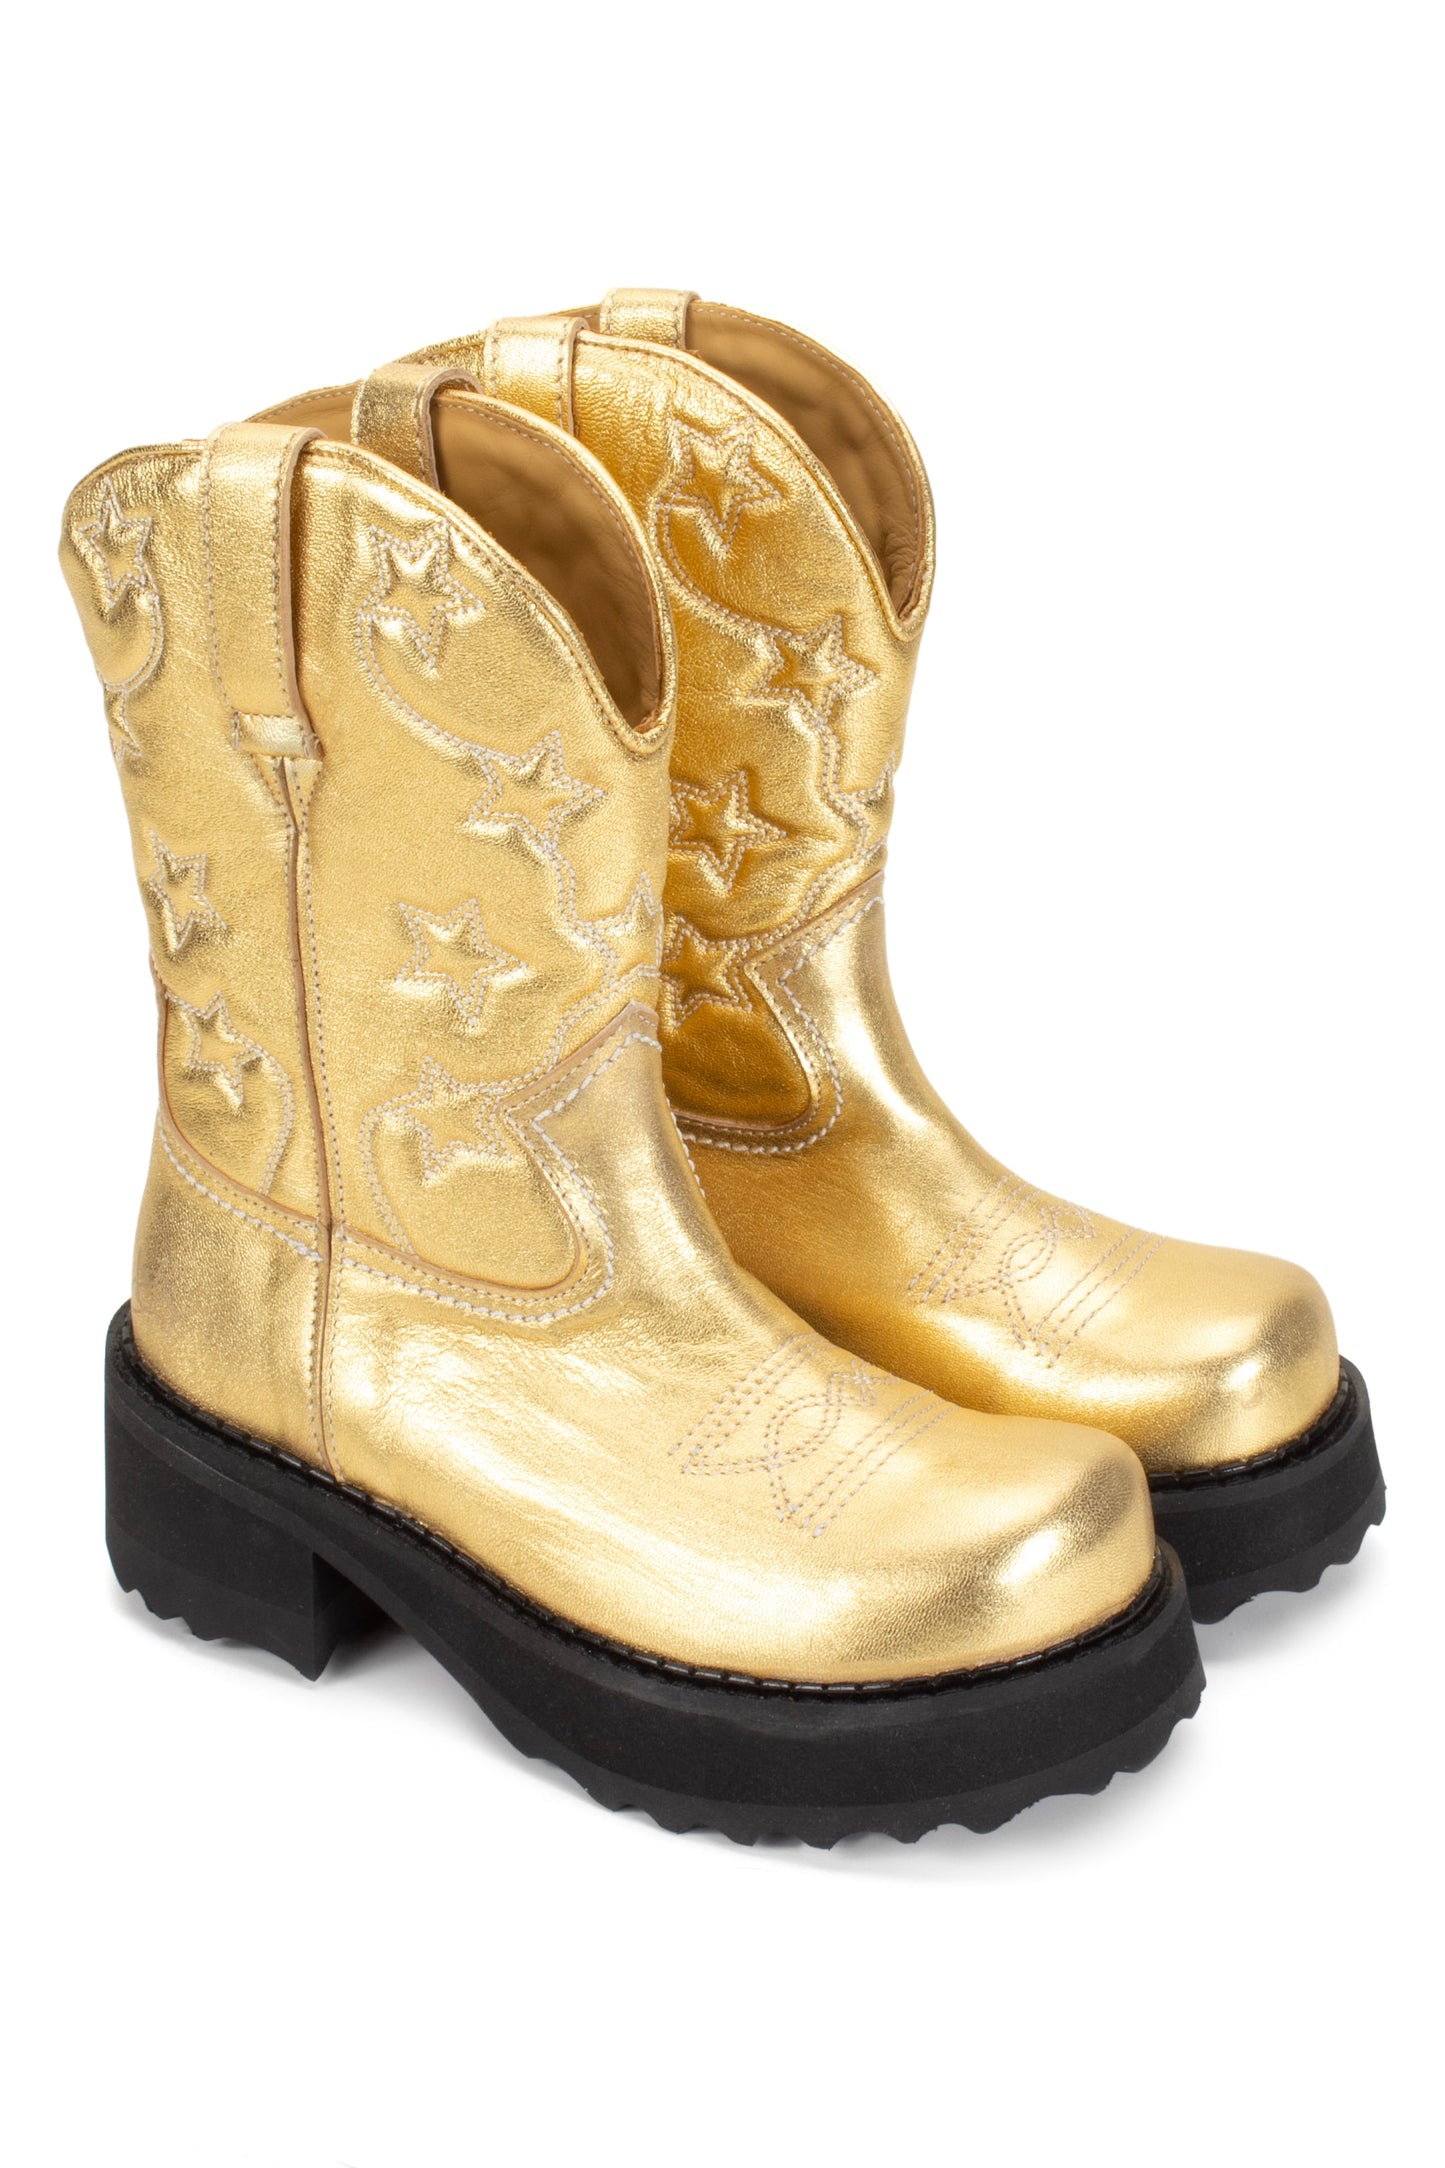 Cowboy Boot, are a pair of gold-colored cowboy-style boots with a high black sole